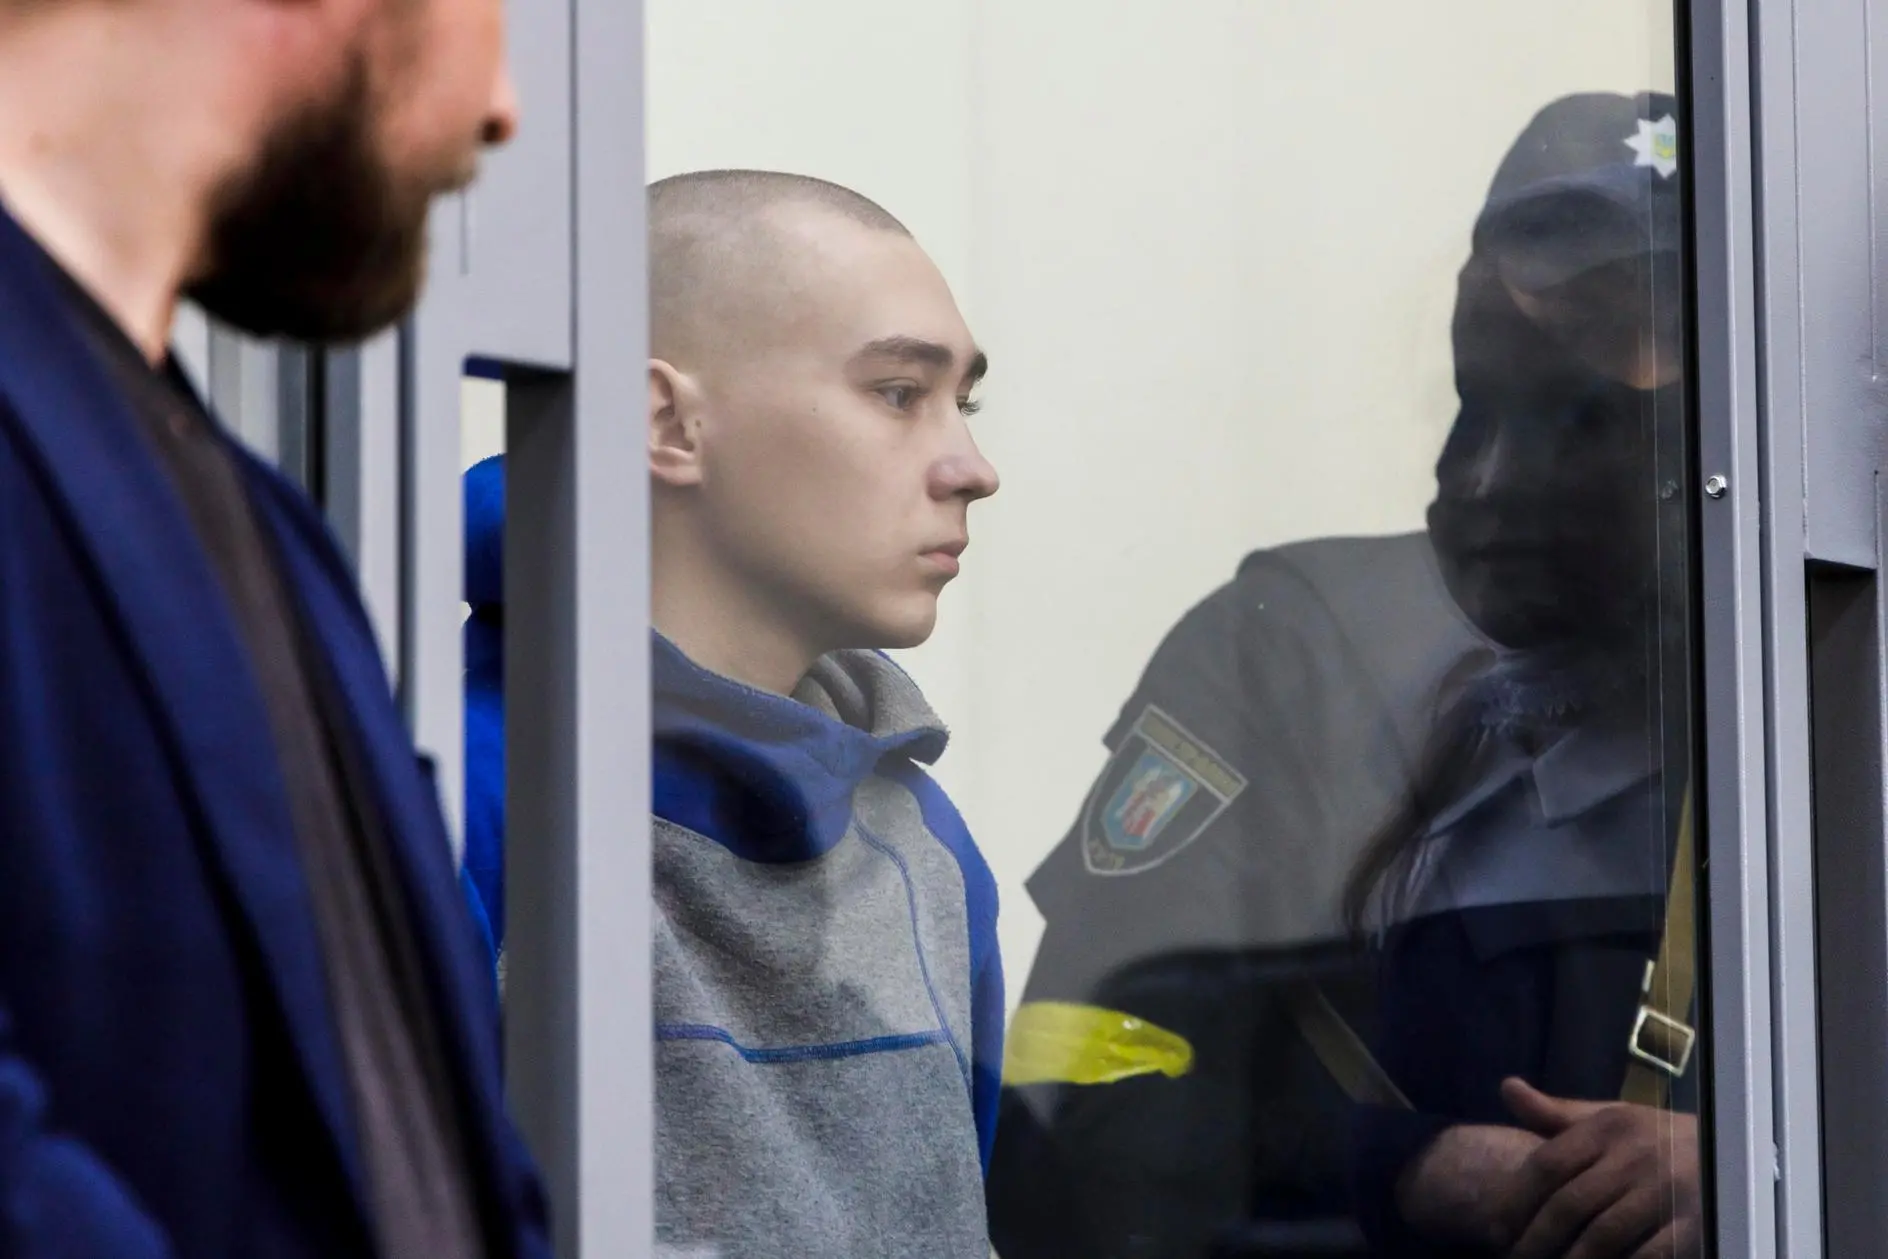 epa09944448 Russian serviceman Vadim Shishimarin (C) attends a court hearing in the Solomyansky district court in Kyiv, Ukraine, 13 May 2022. Vadim Shishimarin (21) is accused of killing an unarmed 62-year-old civilian man as Shishimarin fled with four other soldiers near Chupakha village in the Sumy area. Ukraine is holding the first war crimes trial amid the Russian invasion. Shishimarin faces possible life imprisonment if found guilty as the prosecutor's general office said. EPA/TANYA GORDIENKO